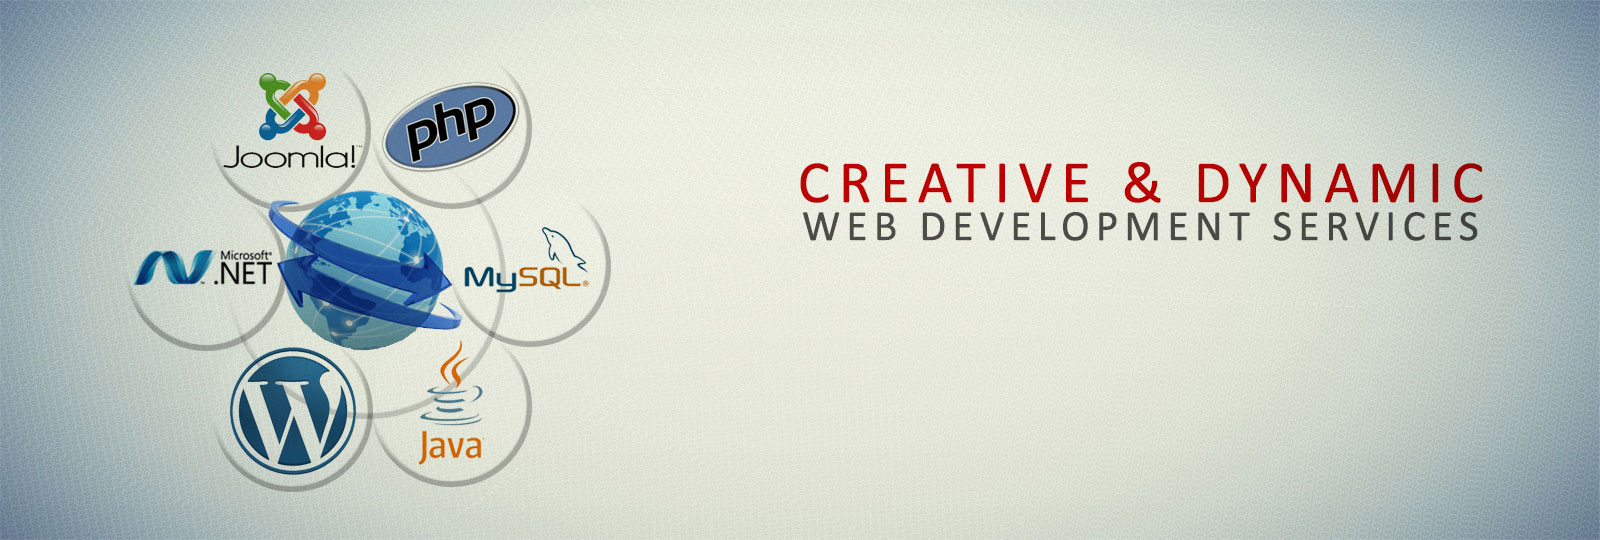 Creative and dynamic web development by AltWare